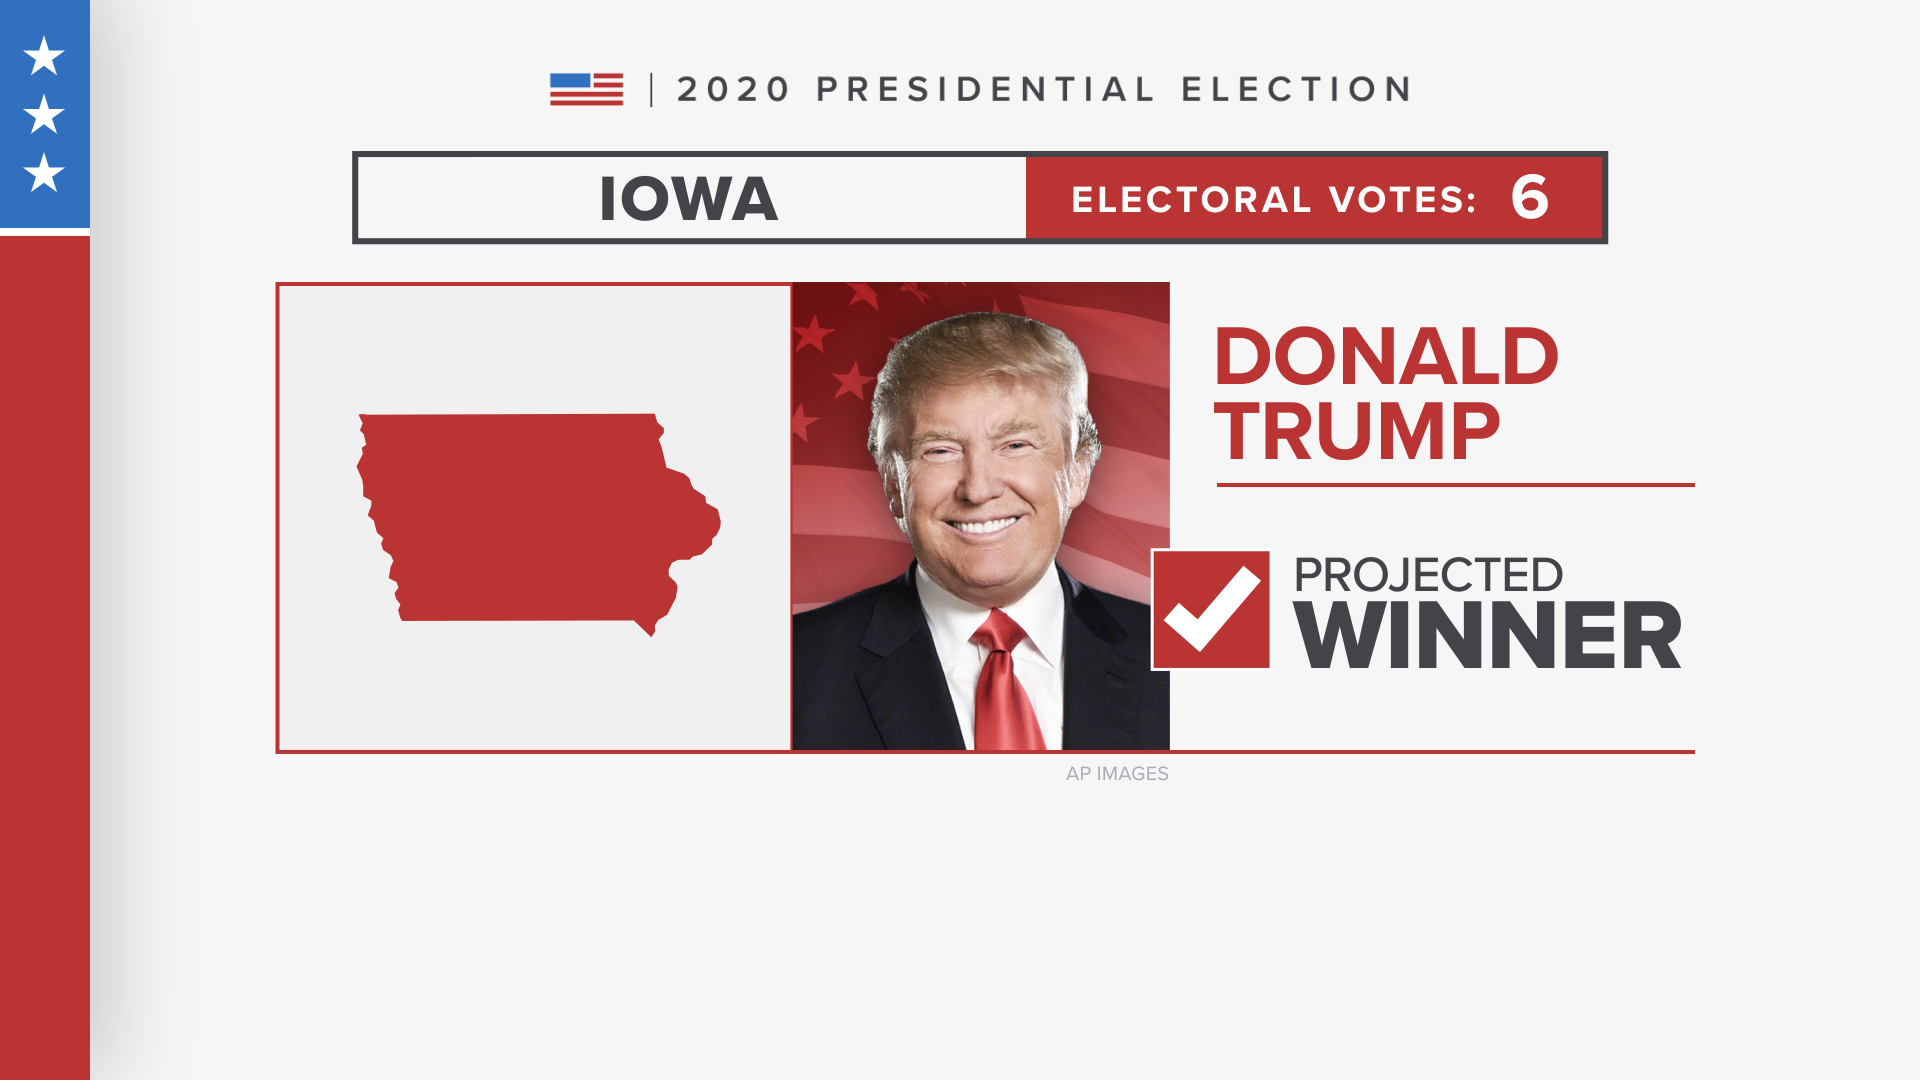 Trump has won the state in back-to-back presidential elections.